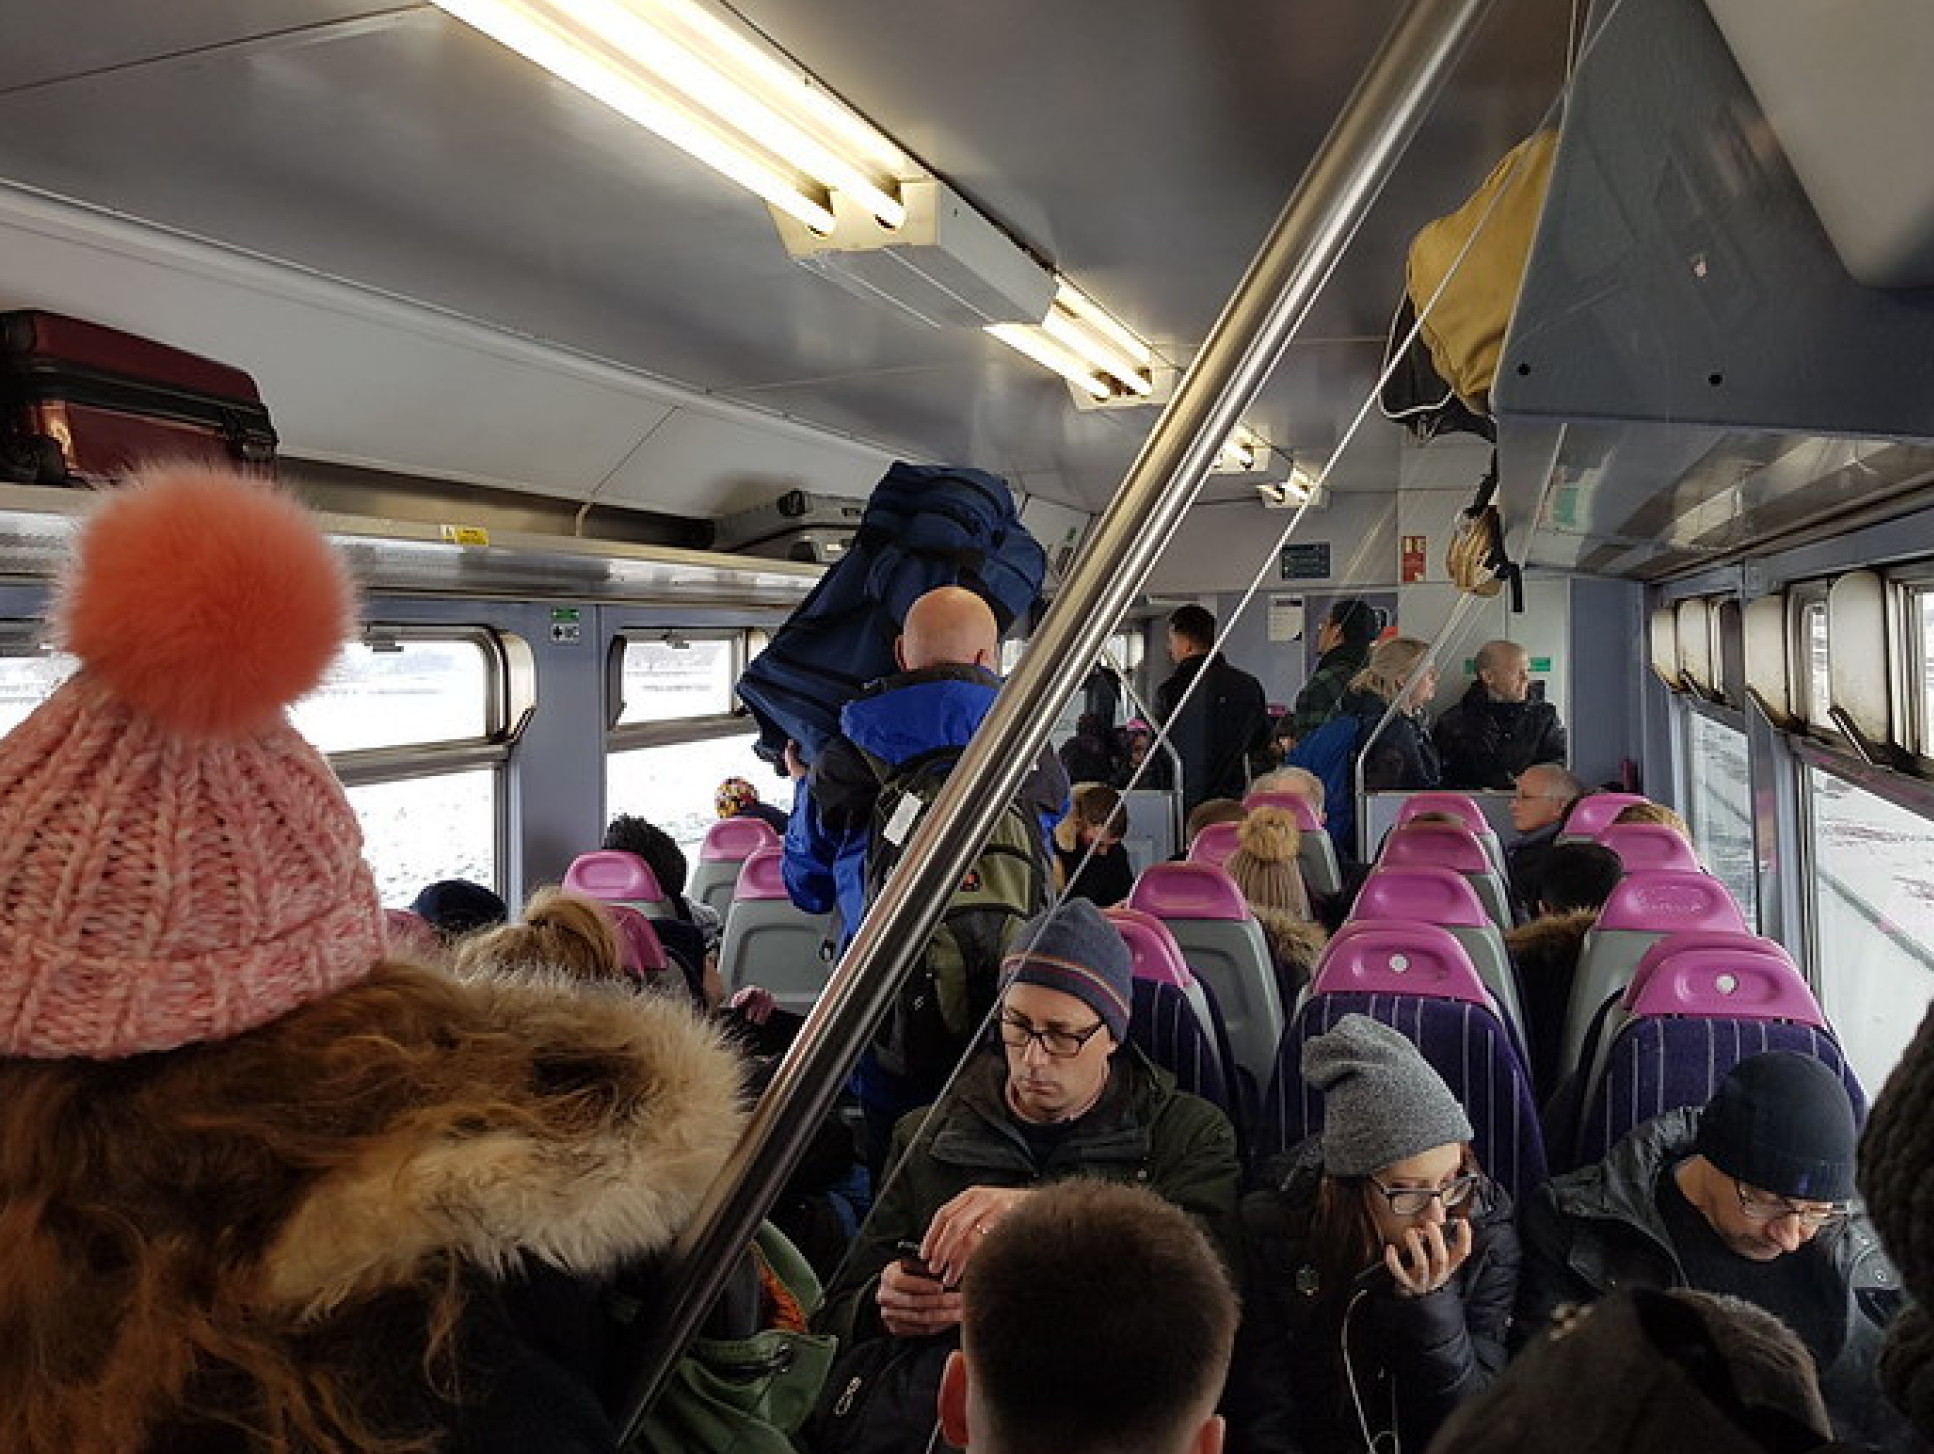 people on a packed UK train carriage, bundled up in coats and hats